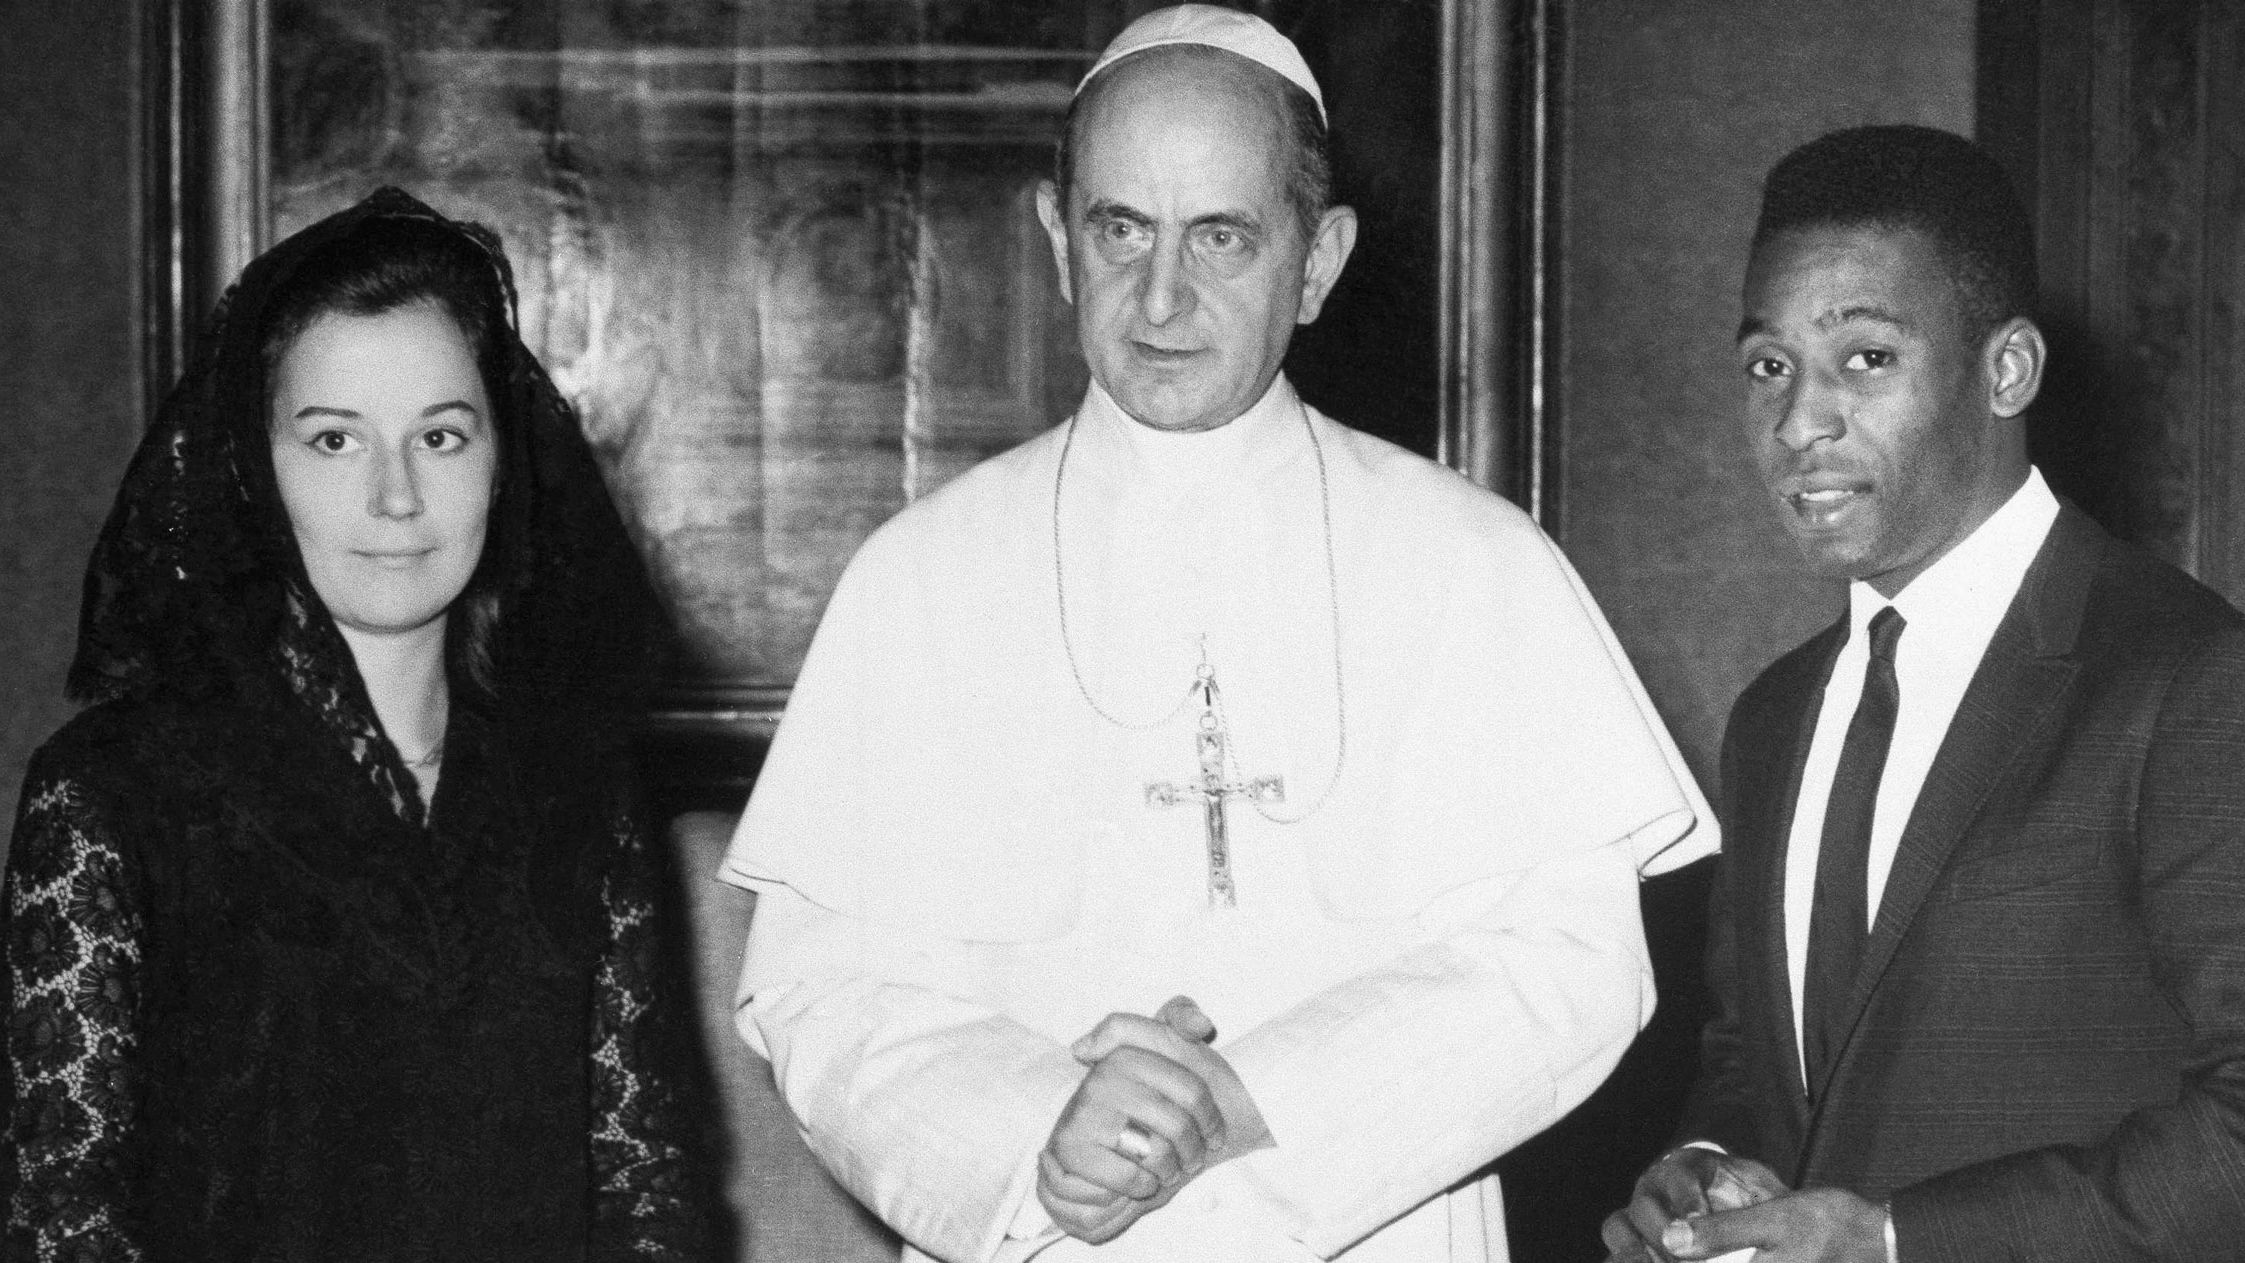 Pelé and his first wife, Rosemeri, meet Pope Paul VI while visiting the Vatican in 1966. The newlywed couple had been honeymooning in Germany, Austria and Italy.